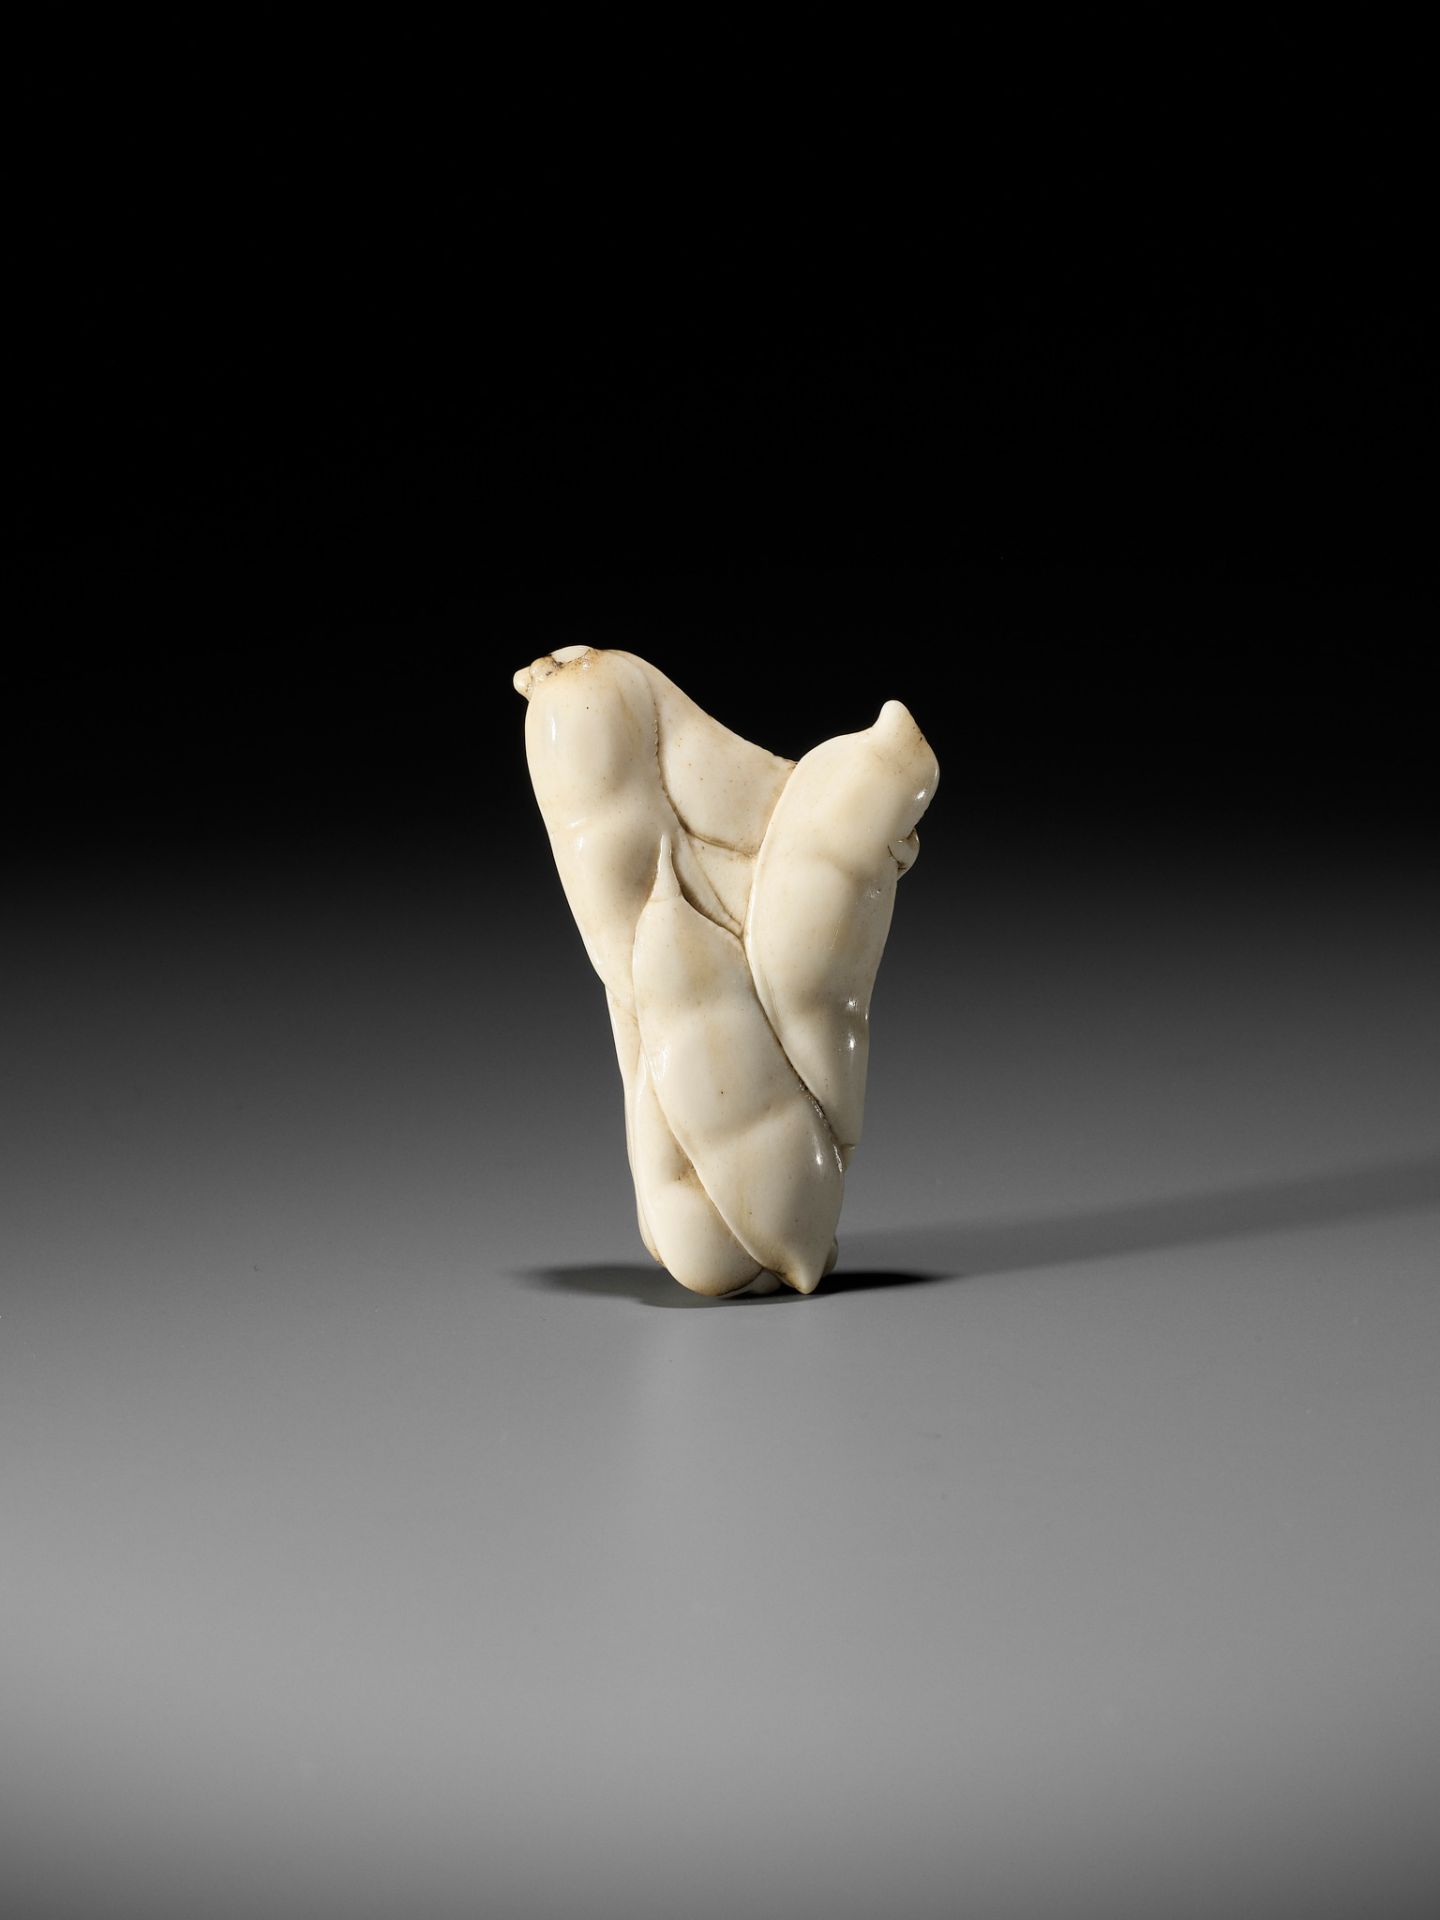 A SUPERB STAG ANTLER NETSUKE OF EDAMAME BEAN-PODS - Image 5 of 9